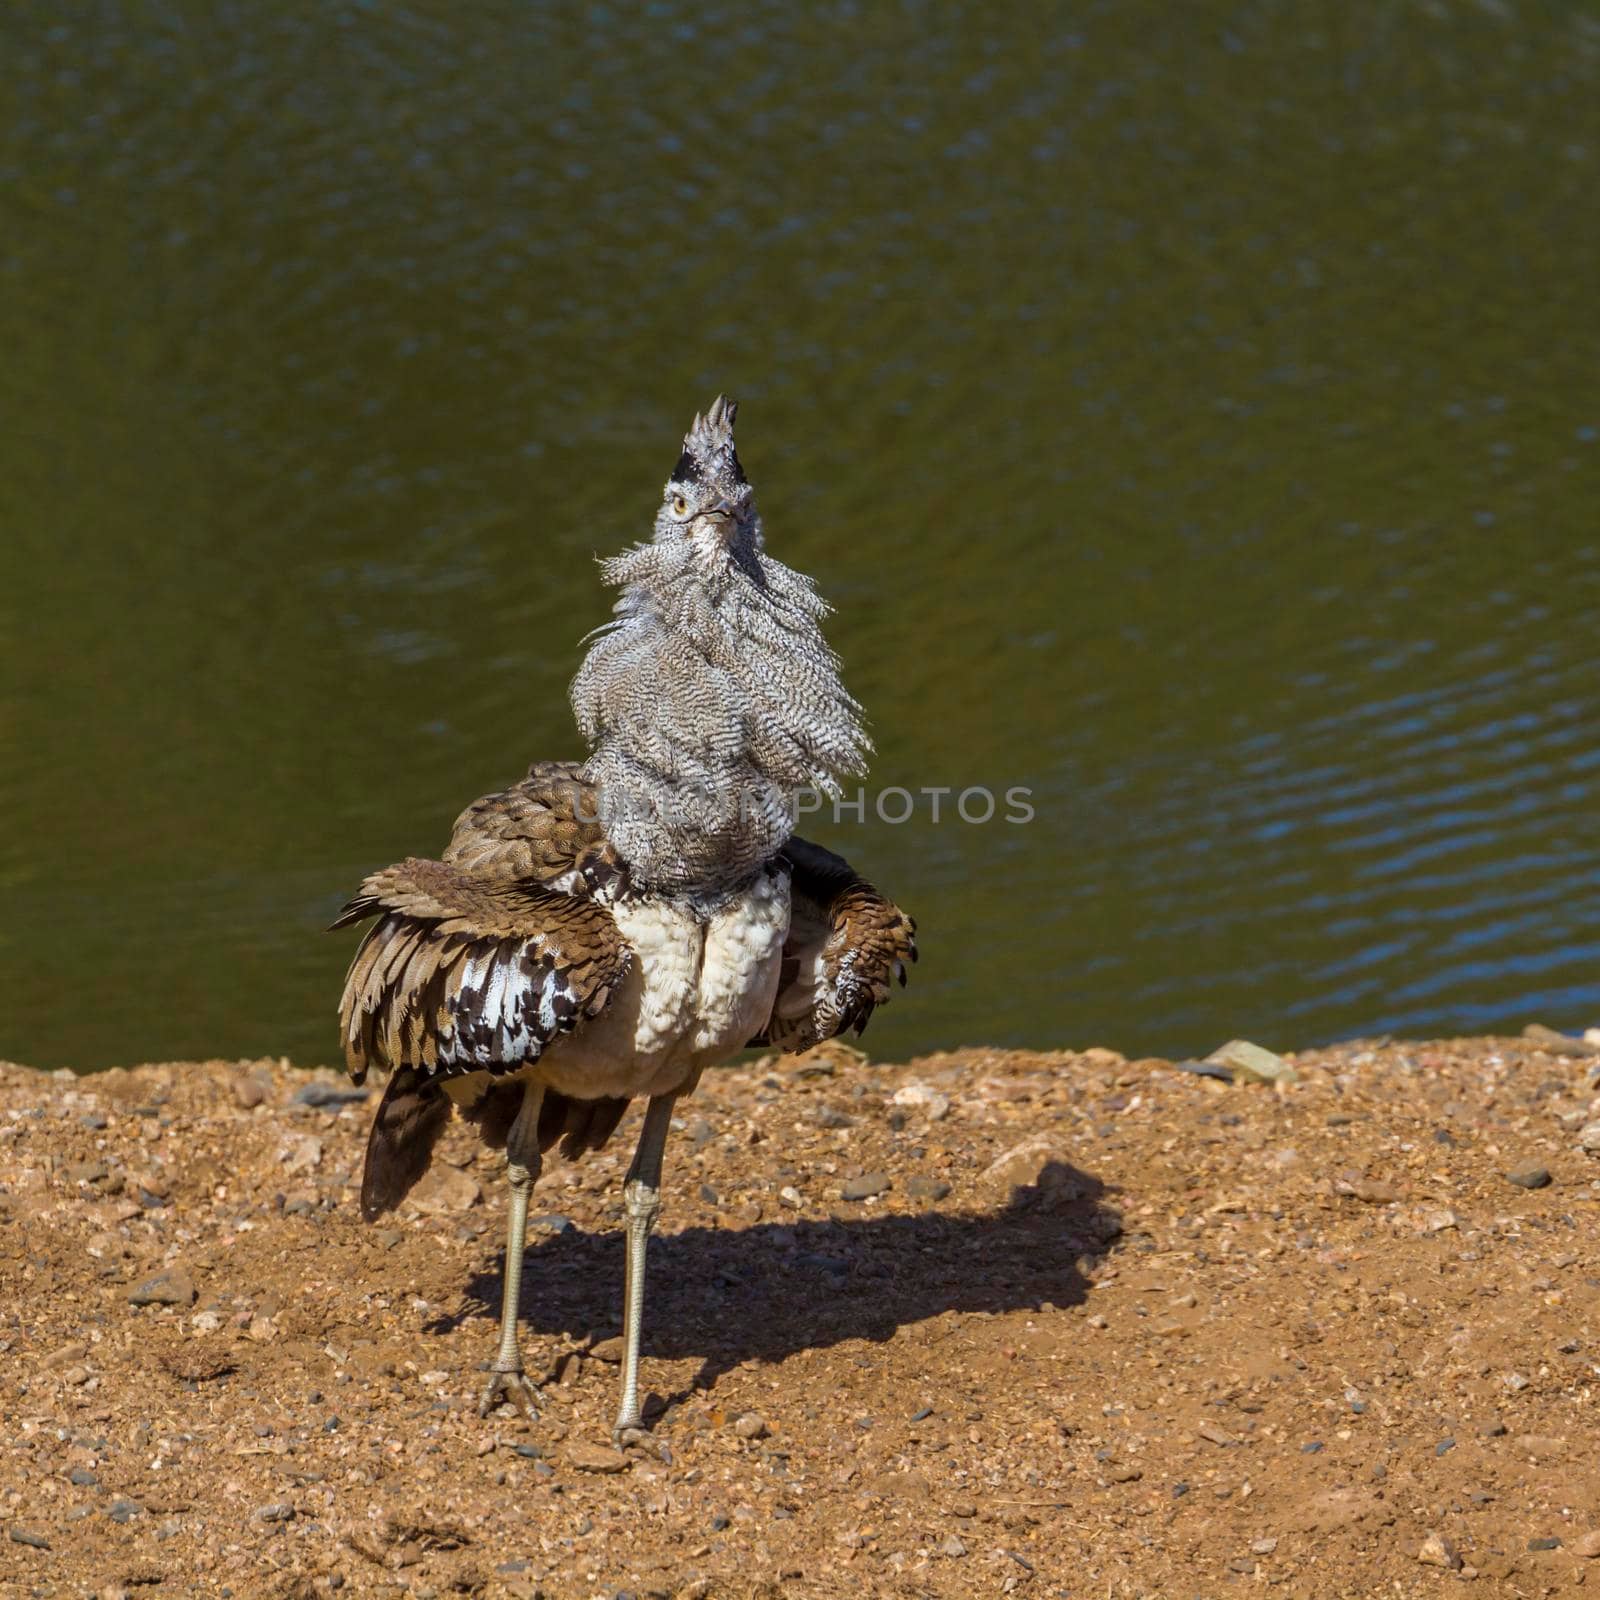 Kori bustard in Kruger National park, South Africa by PACOCOMO